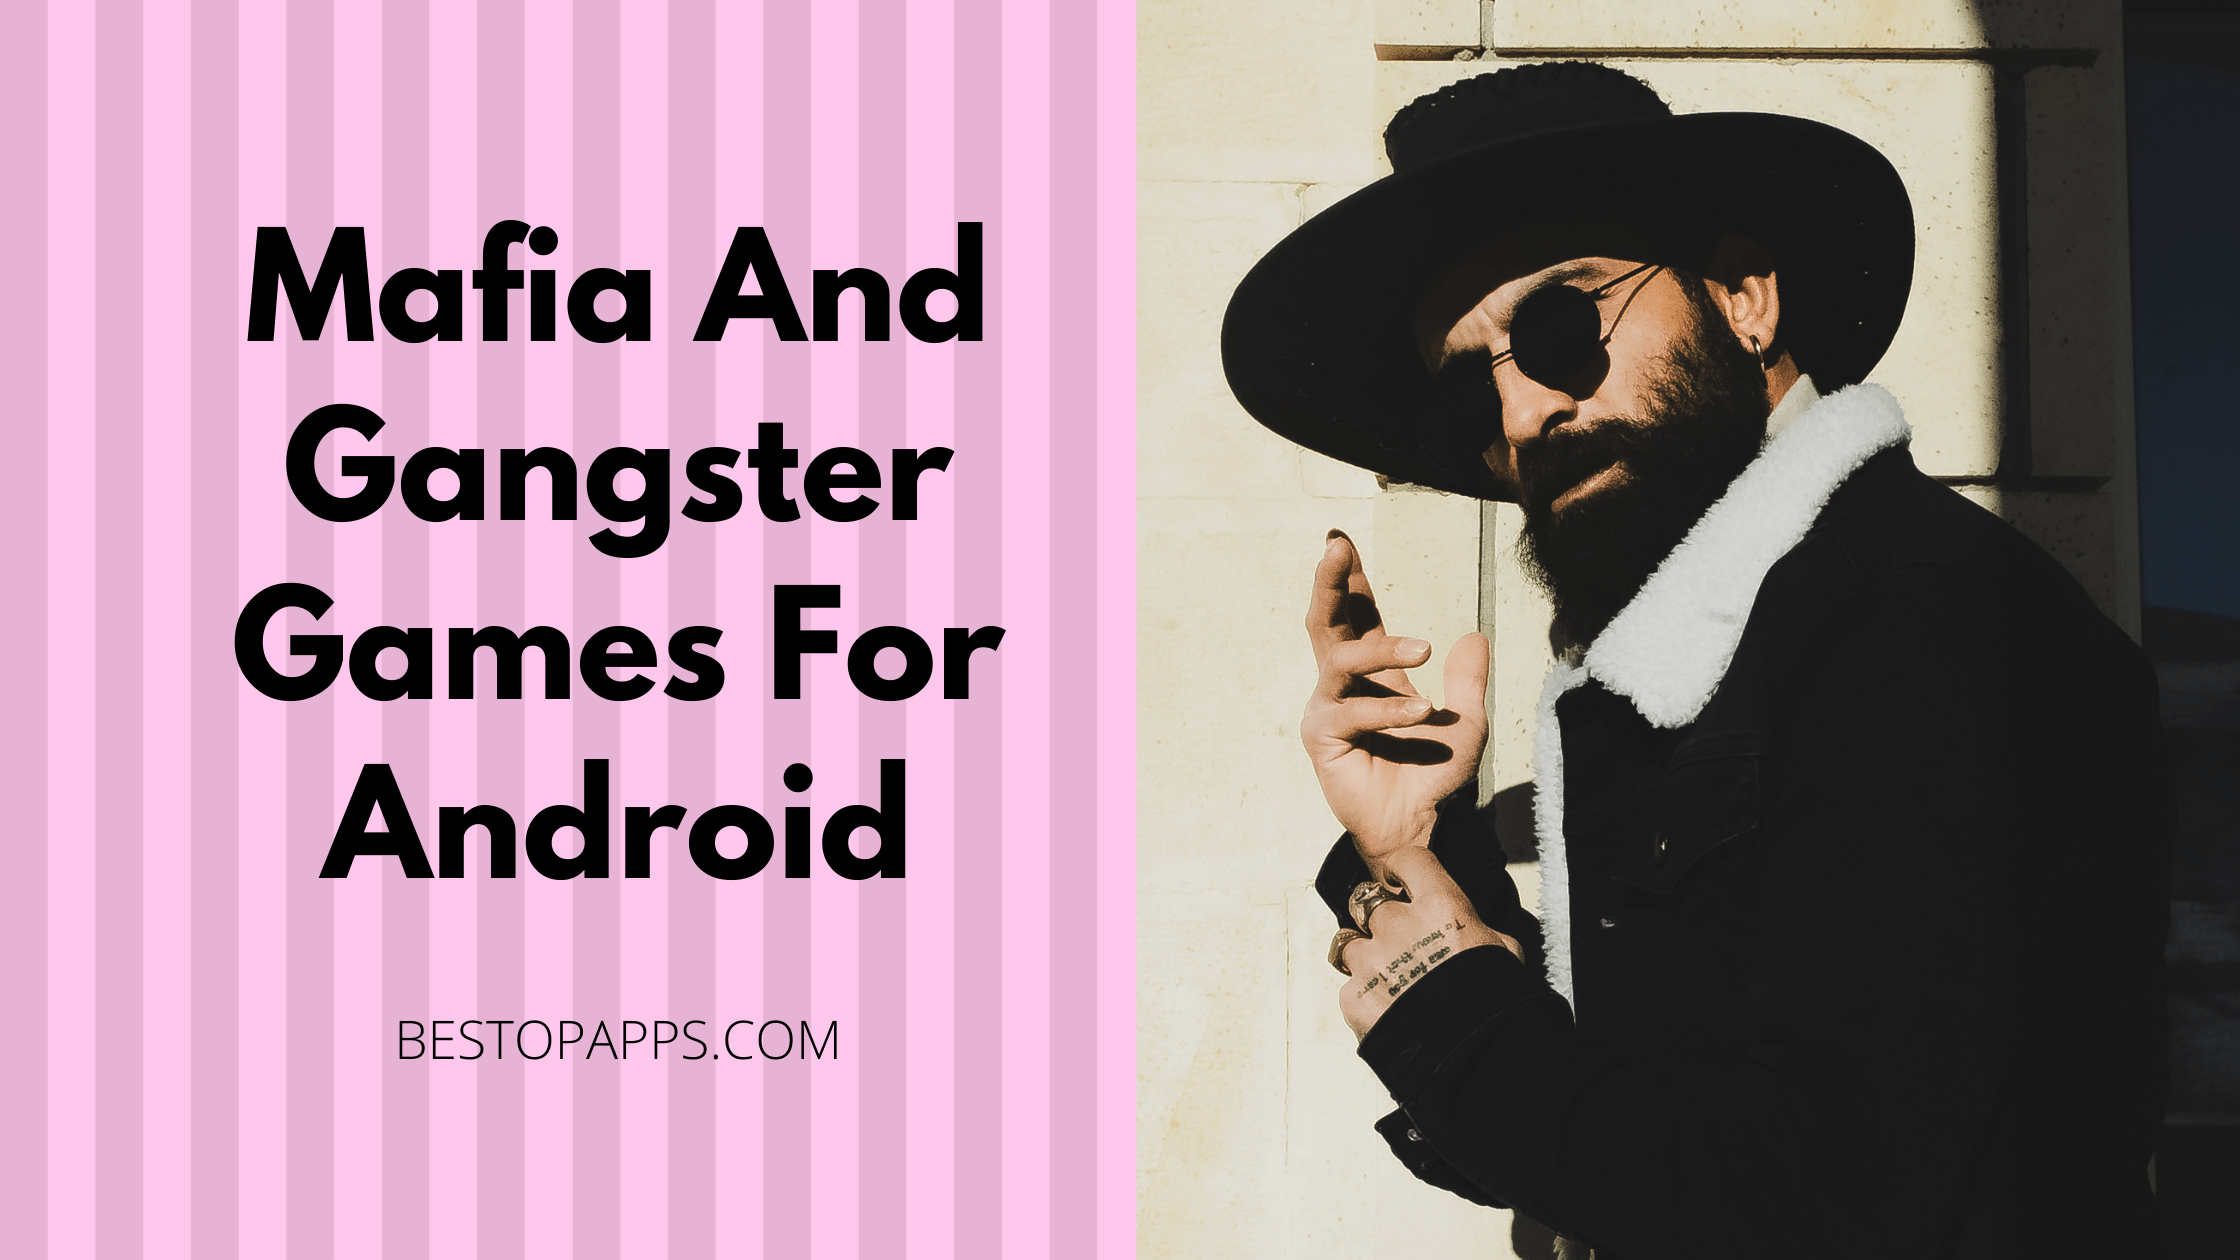 Mafia And Gangster Games For Android